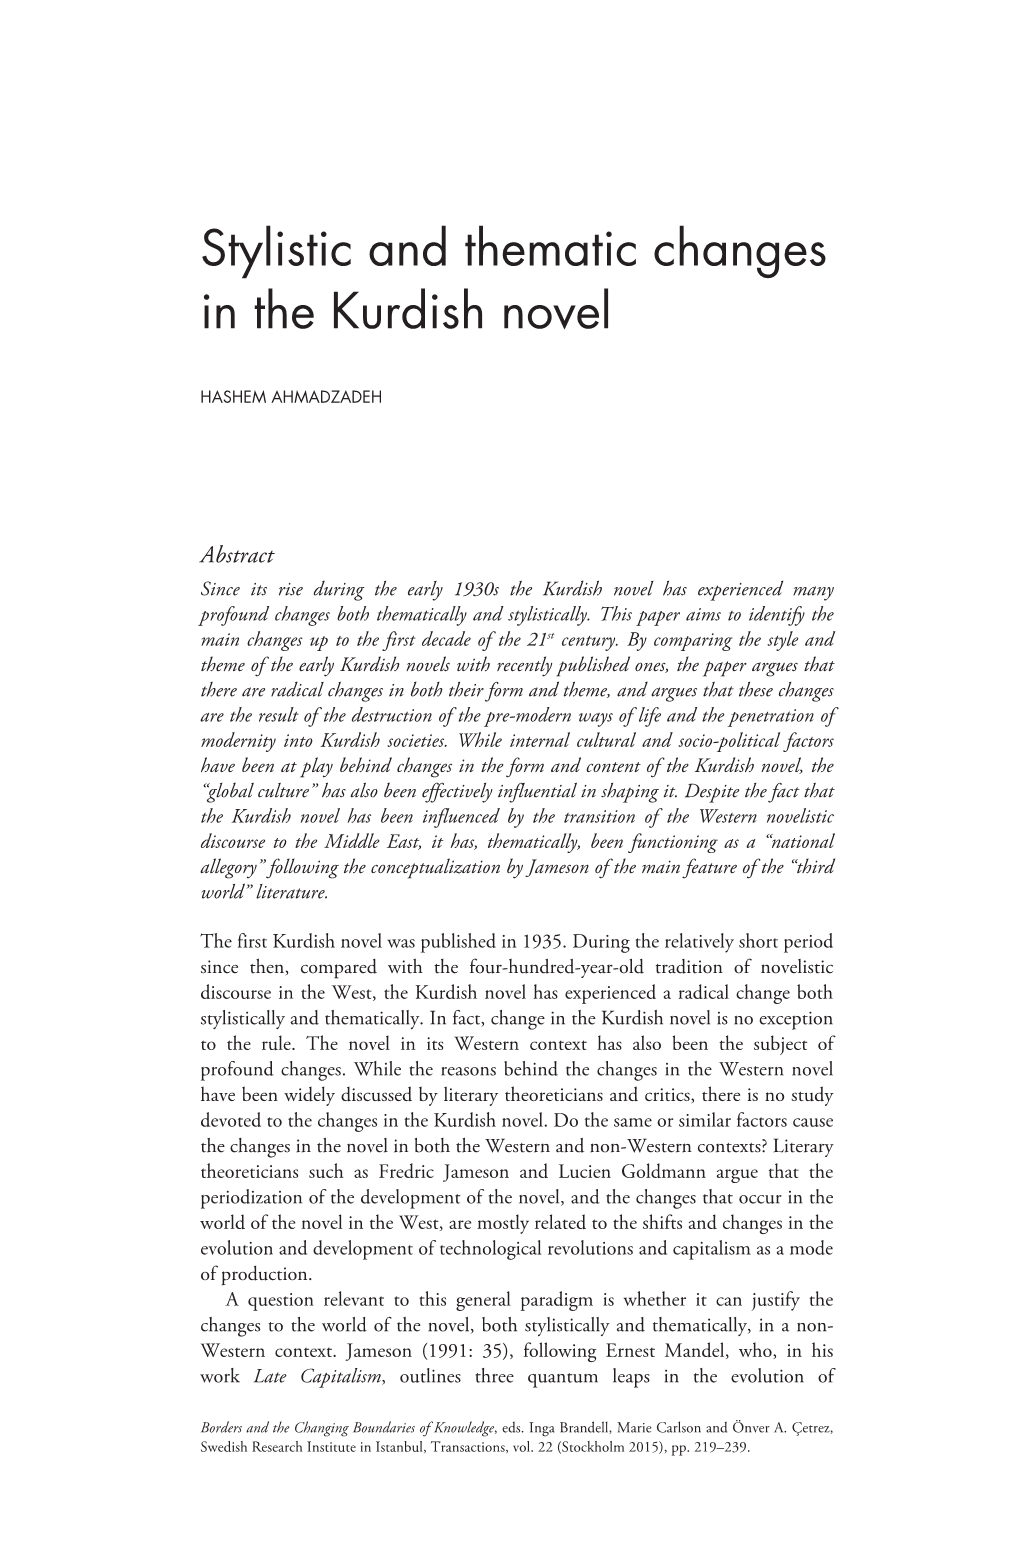 Stylistic and Thematic Changes in the Kurdish Novel